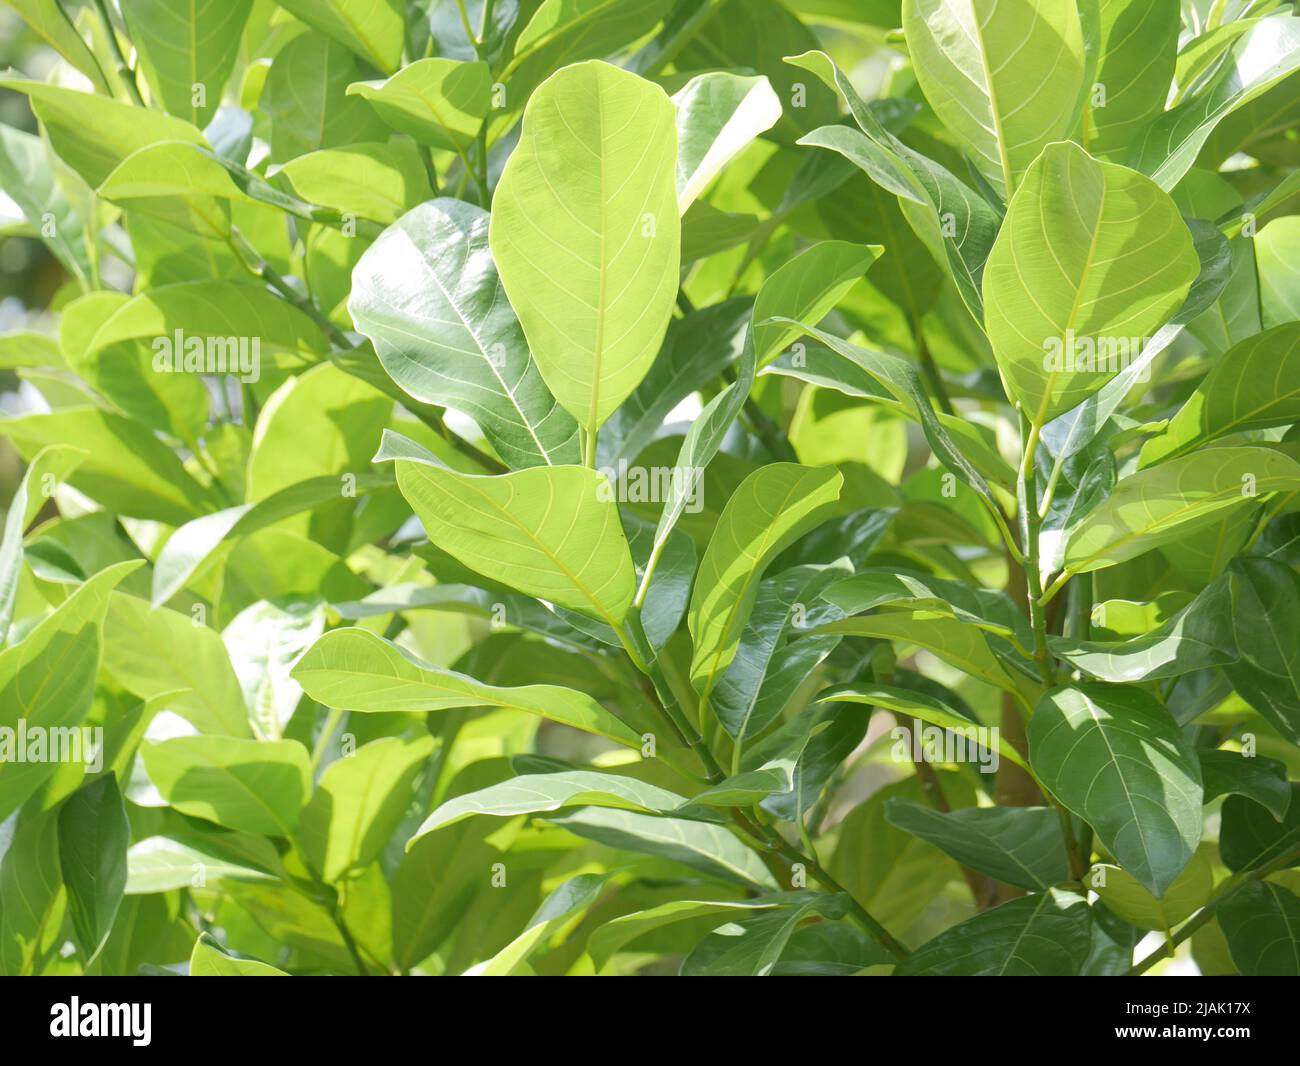 The leaves of the jackfruit tree Stock Photo